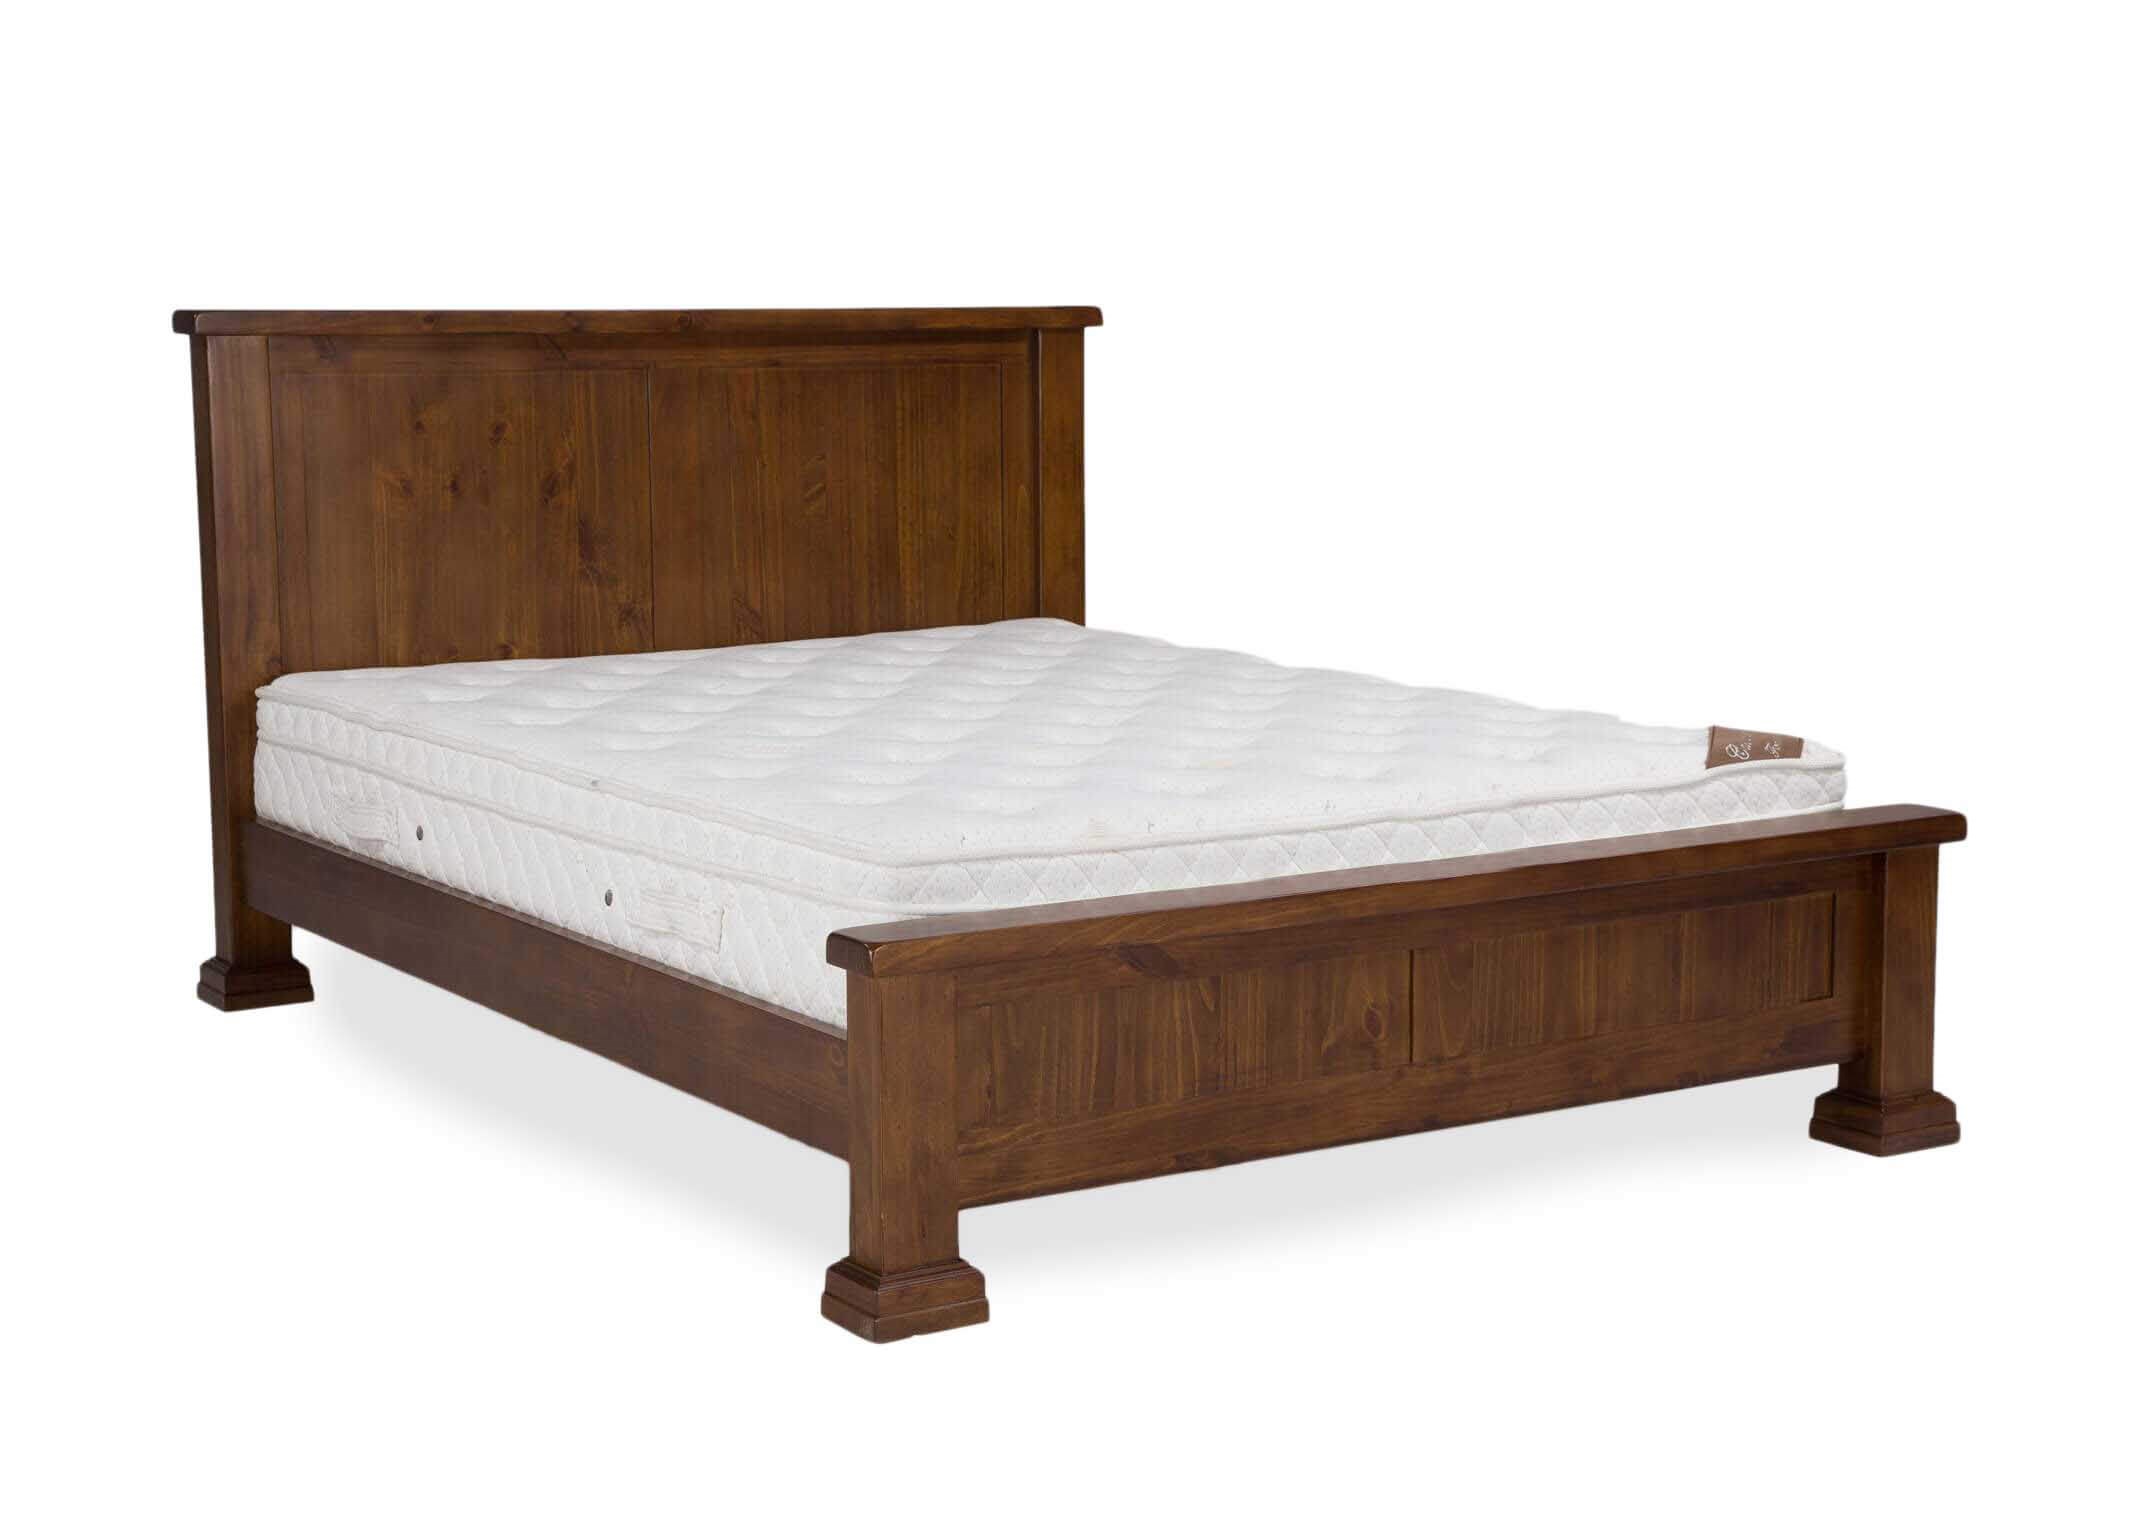 Solid Dark Gloss Wood Bed Frame, Solid Wooden Bed Frame King Size